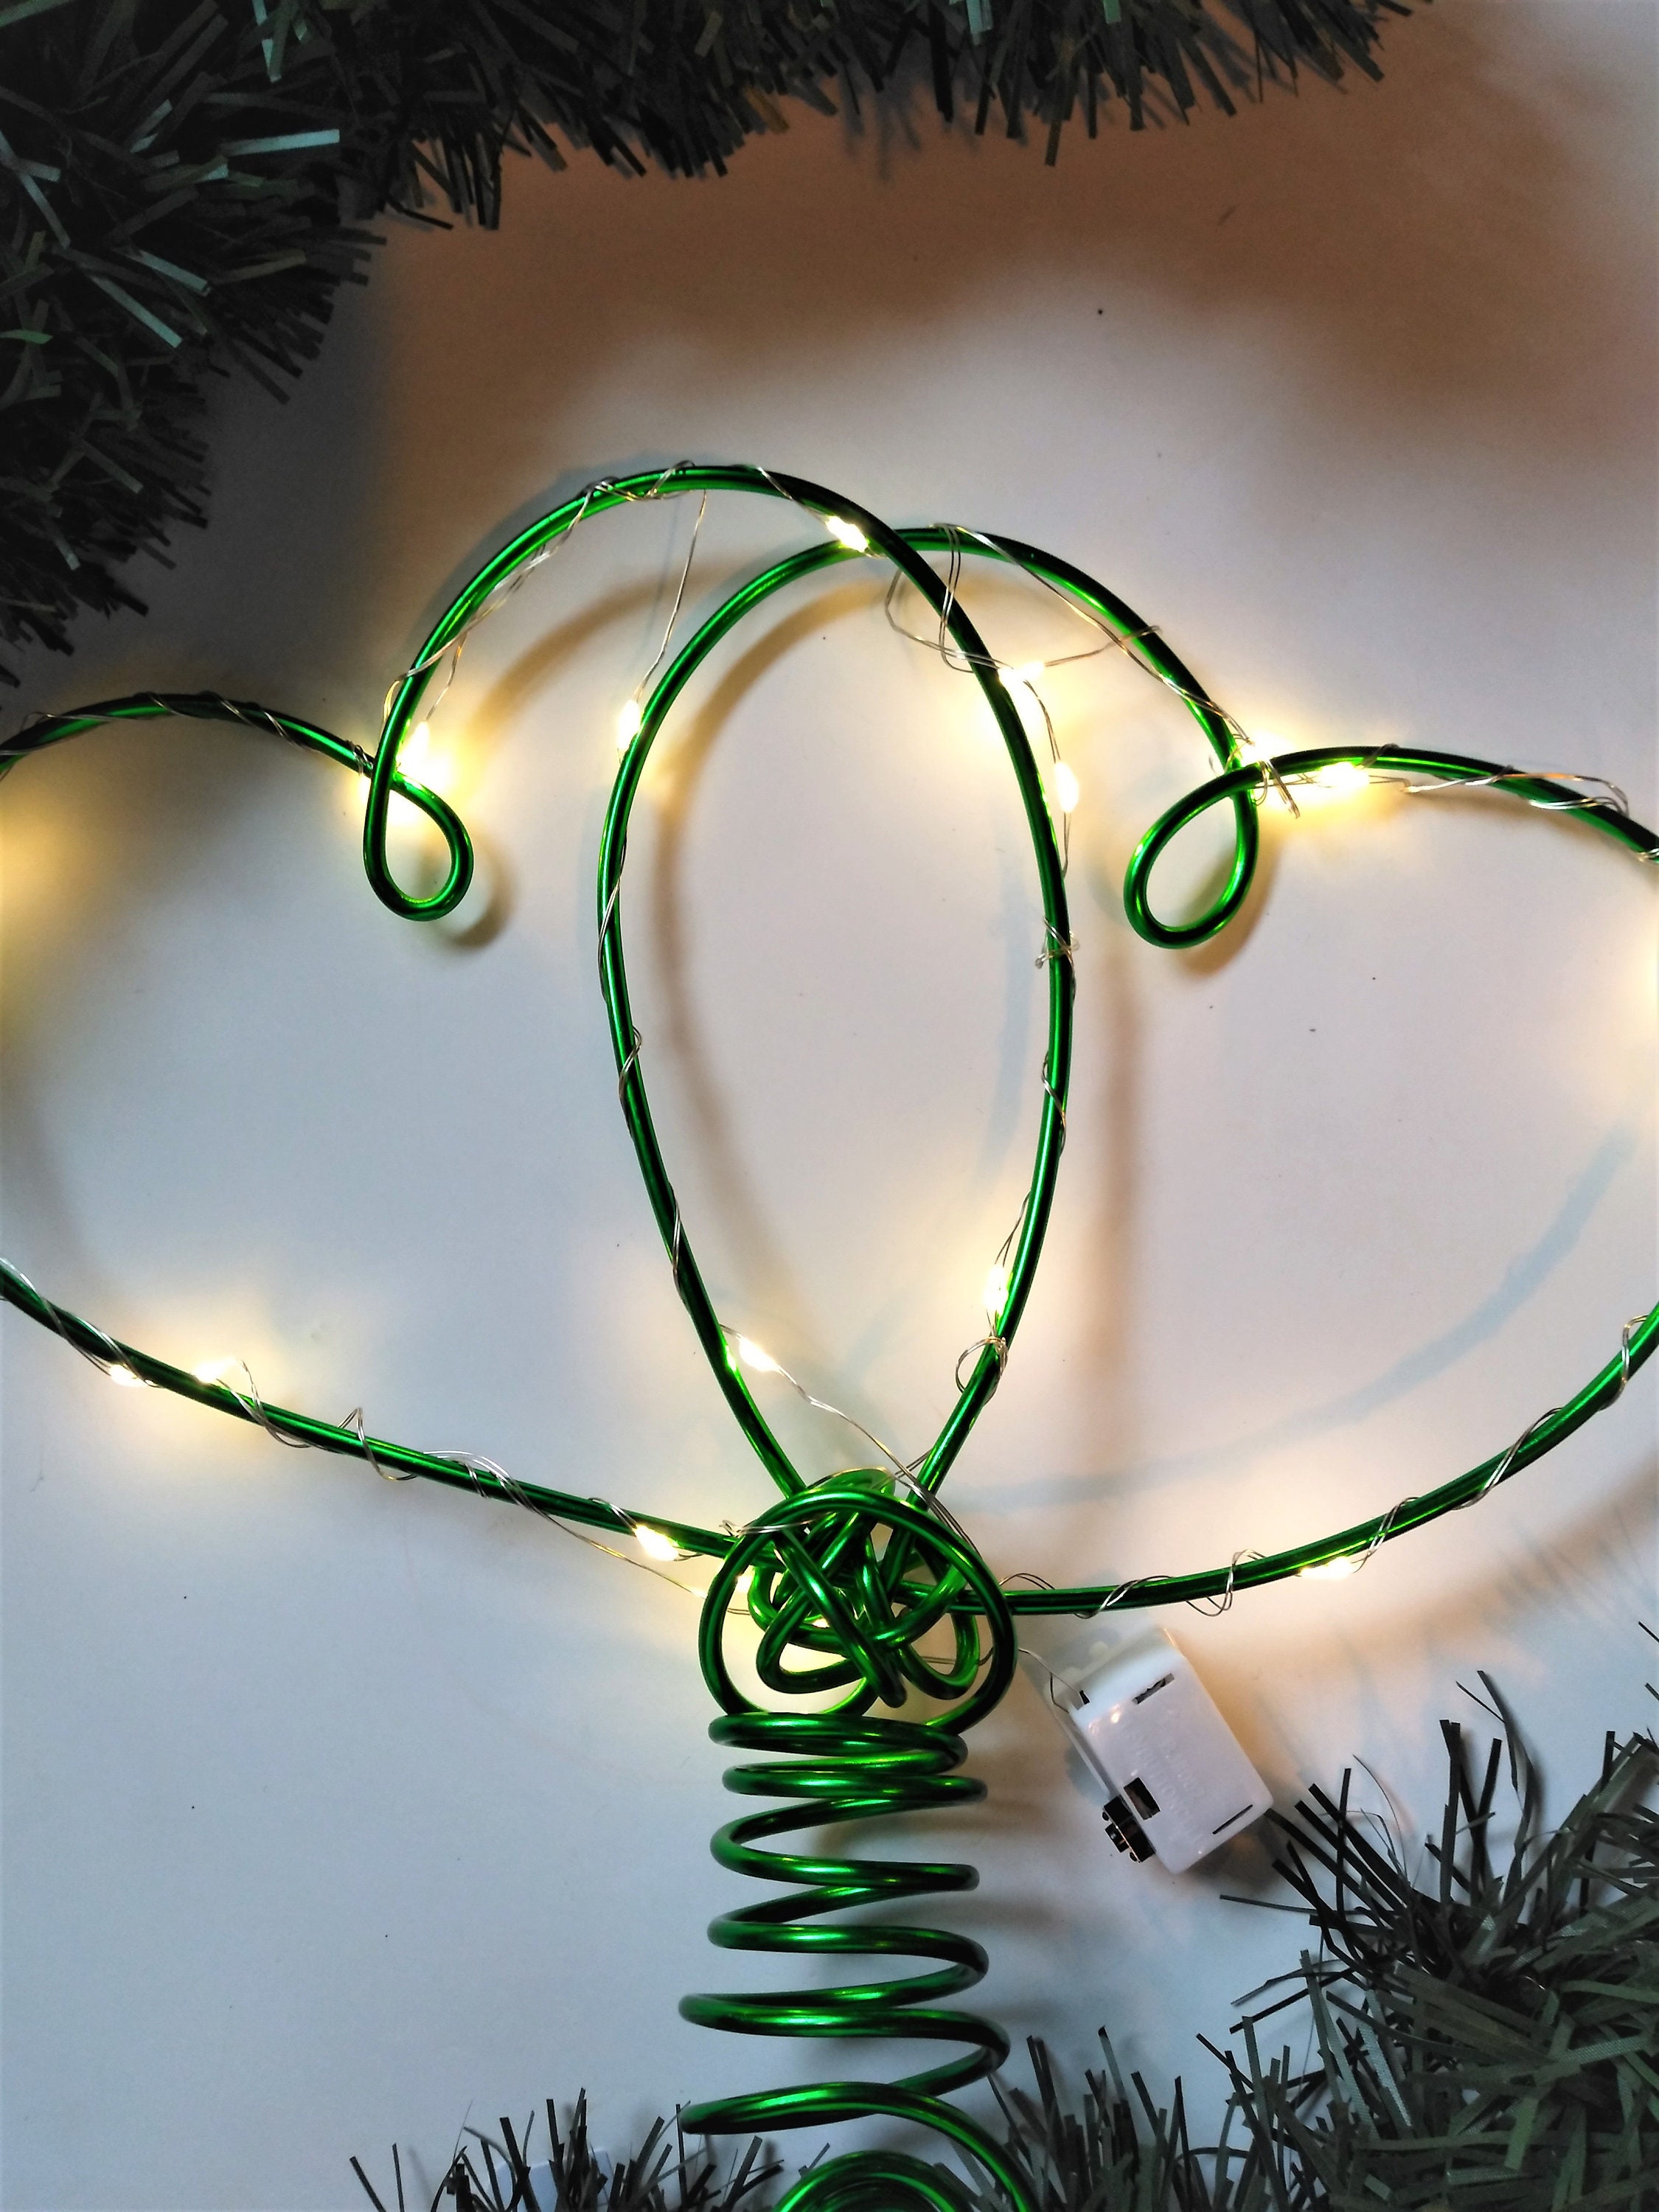 Lighted Hearts Tree Topper for Valentine's With LED Lights 